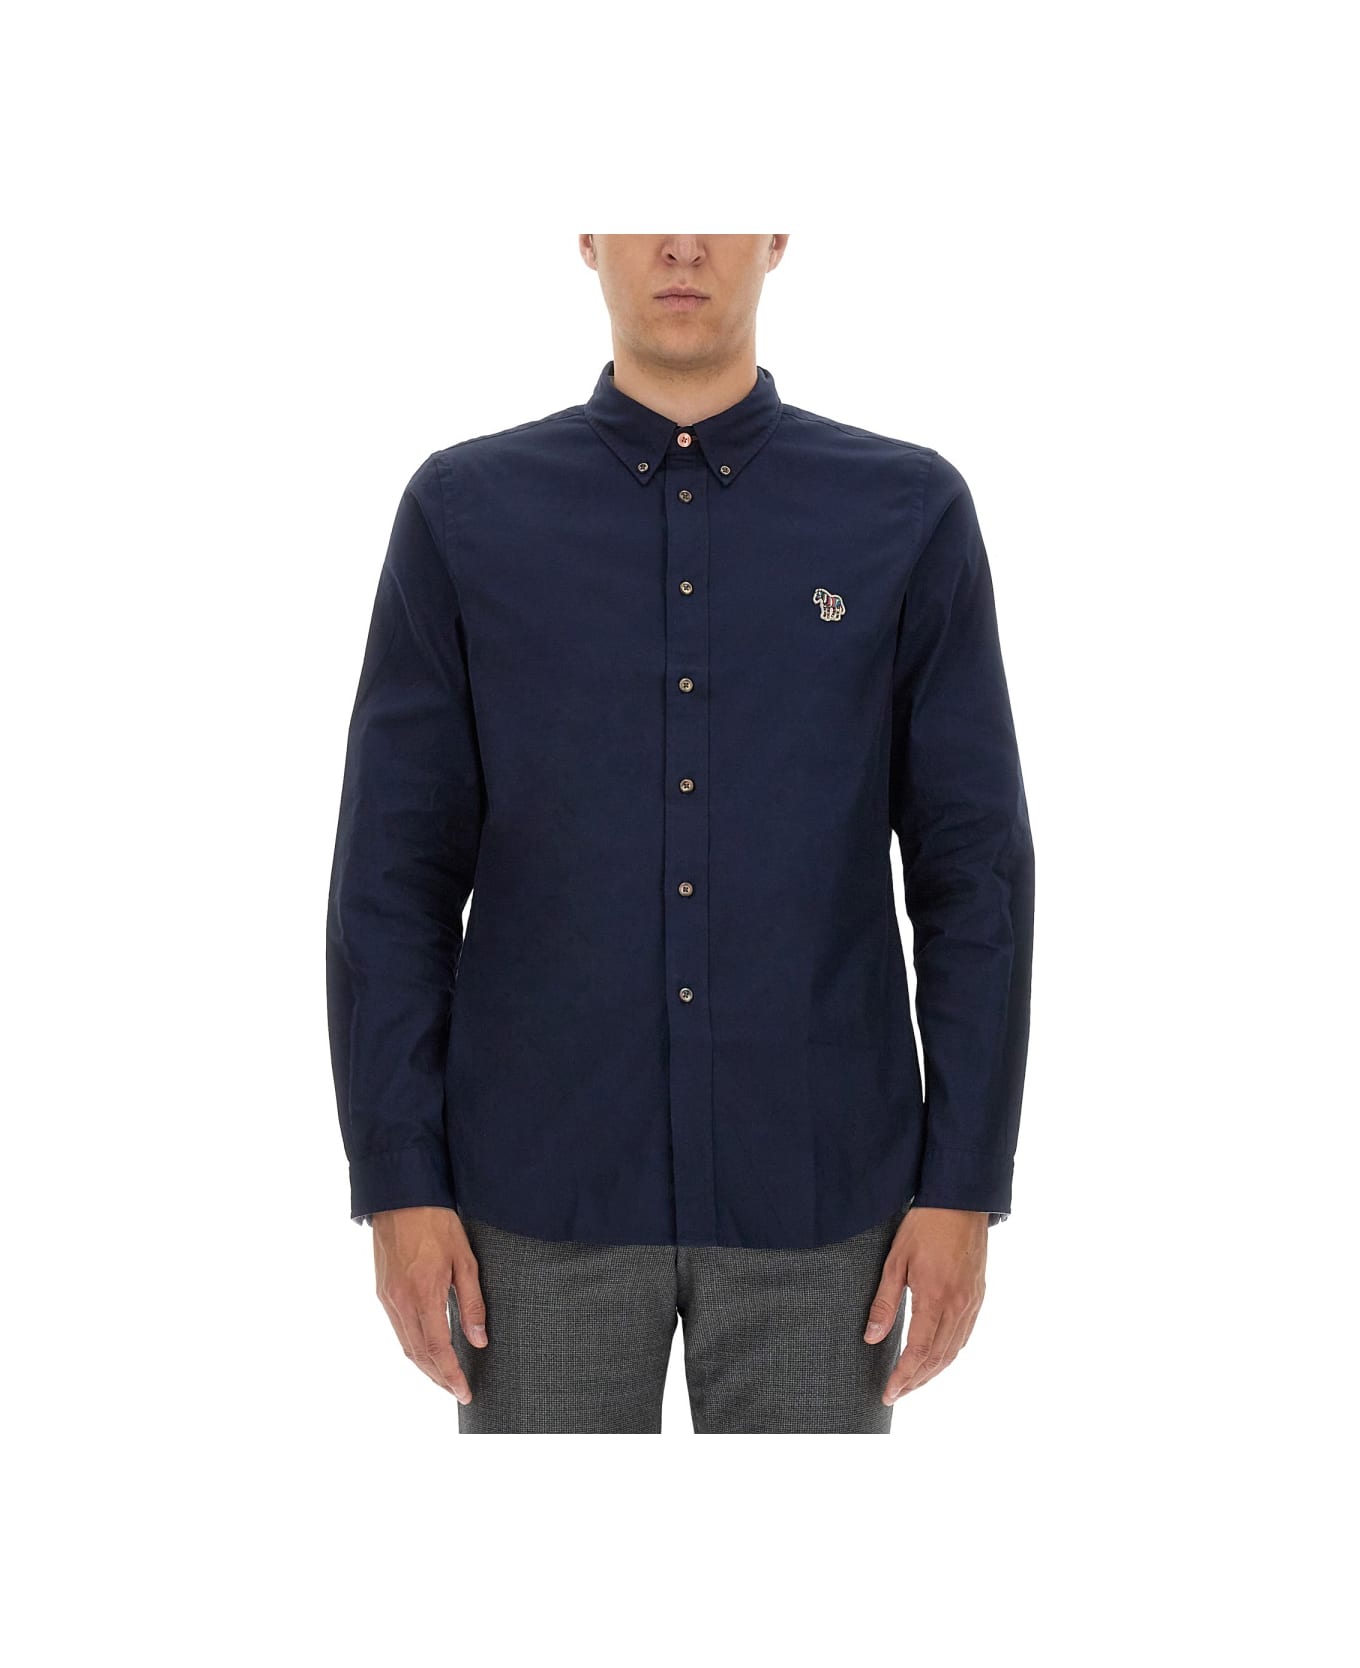 PS by Paul Smith Regular Fit Shirt - BLUE